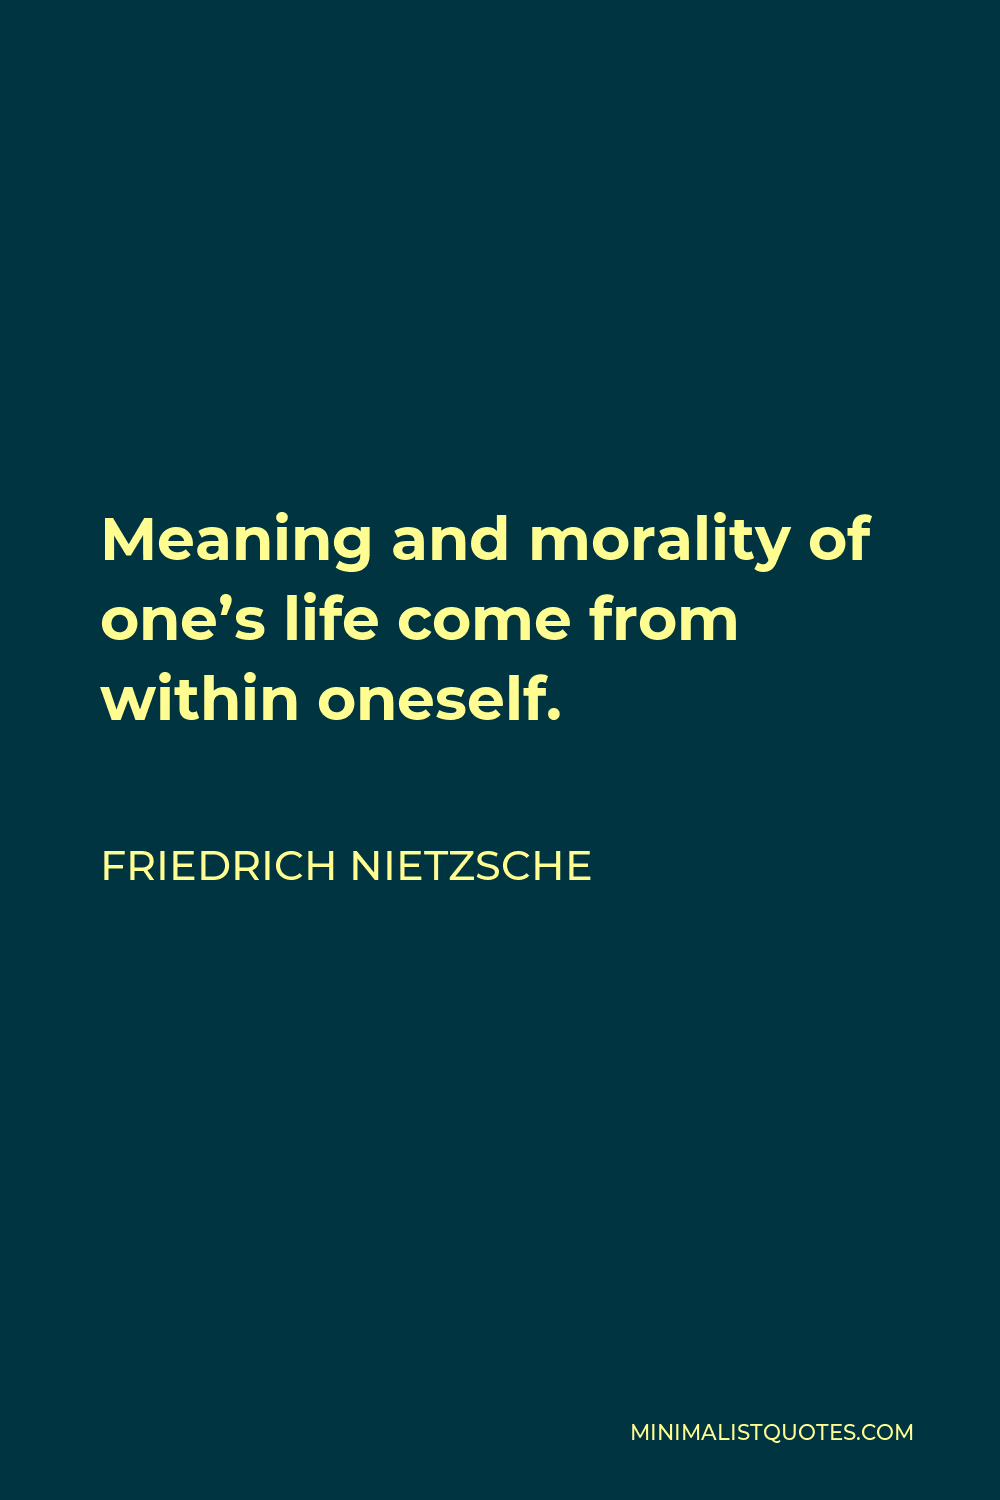 Friedrich Nietzsche Quote - Meaning and morality of one’s life come from within oneself.